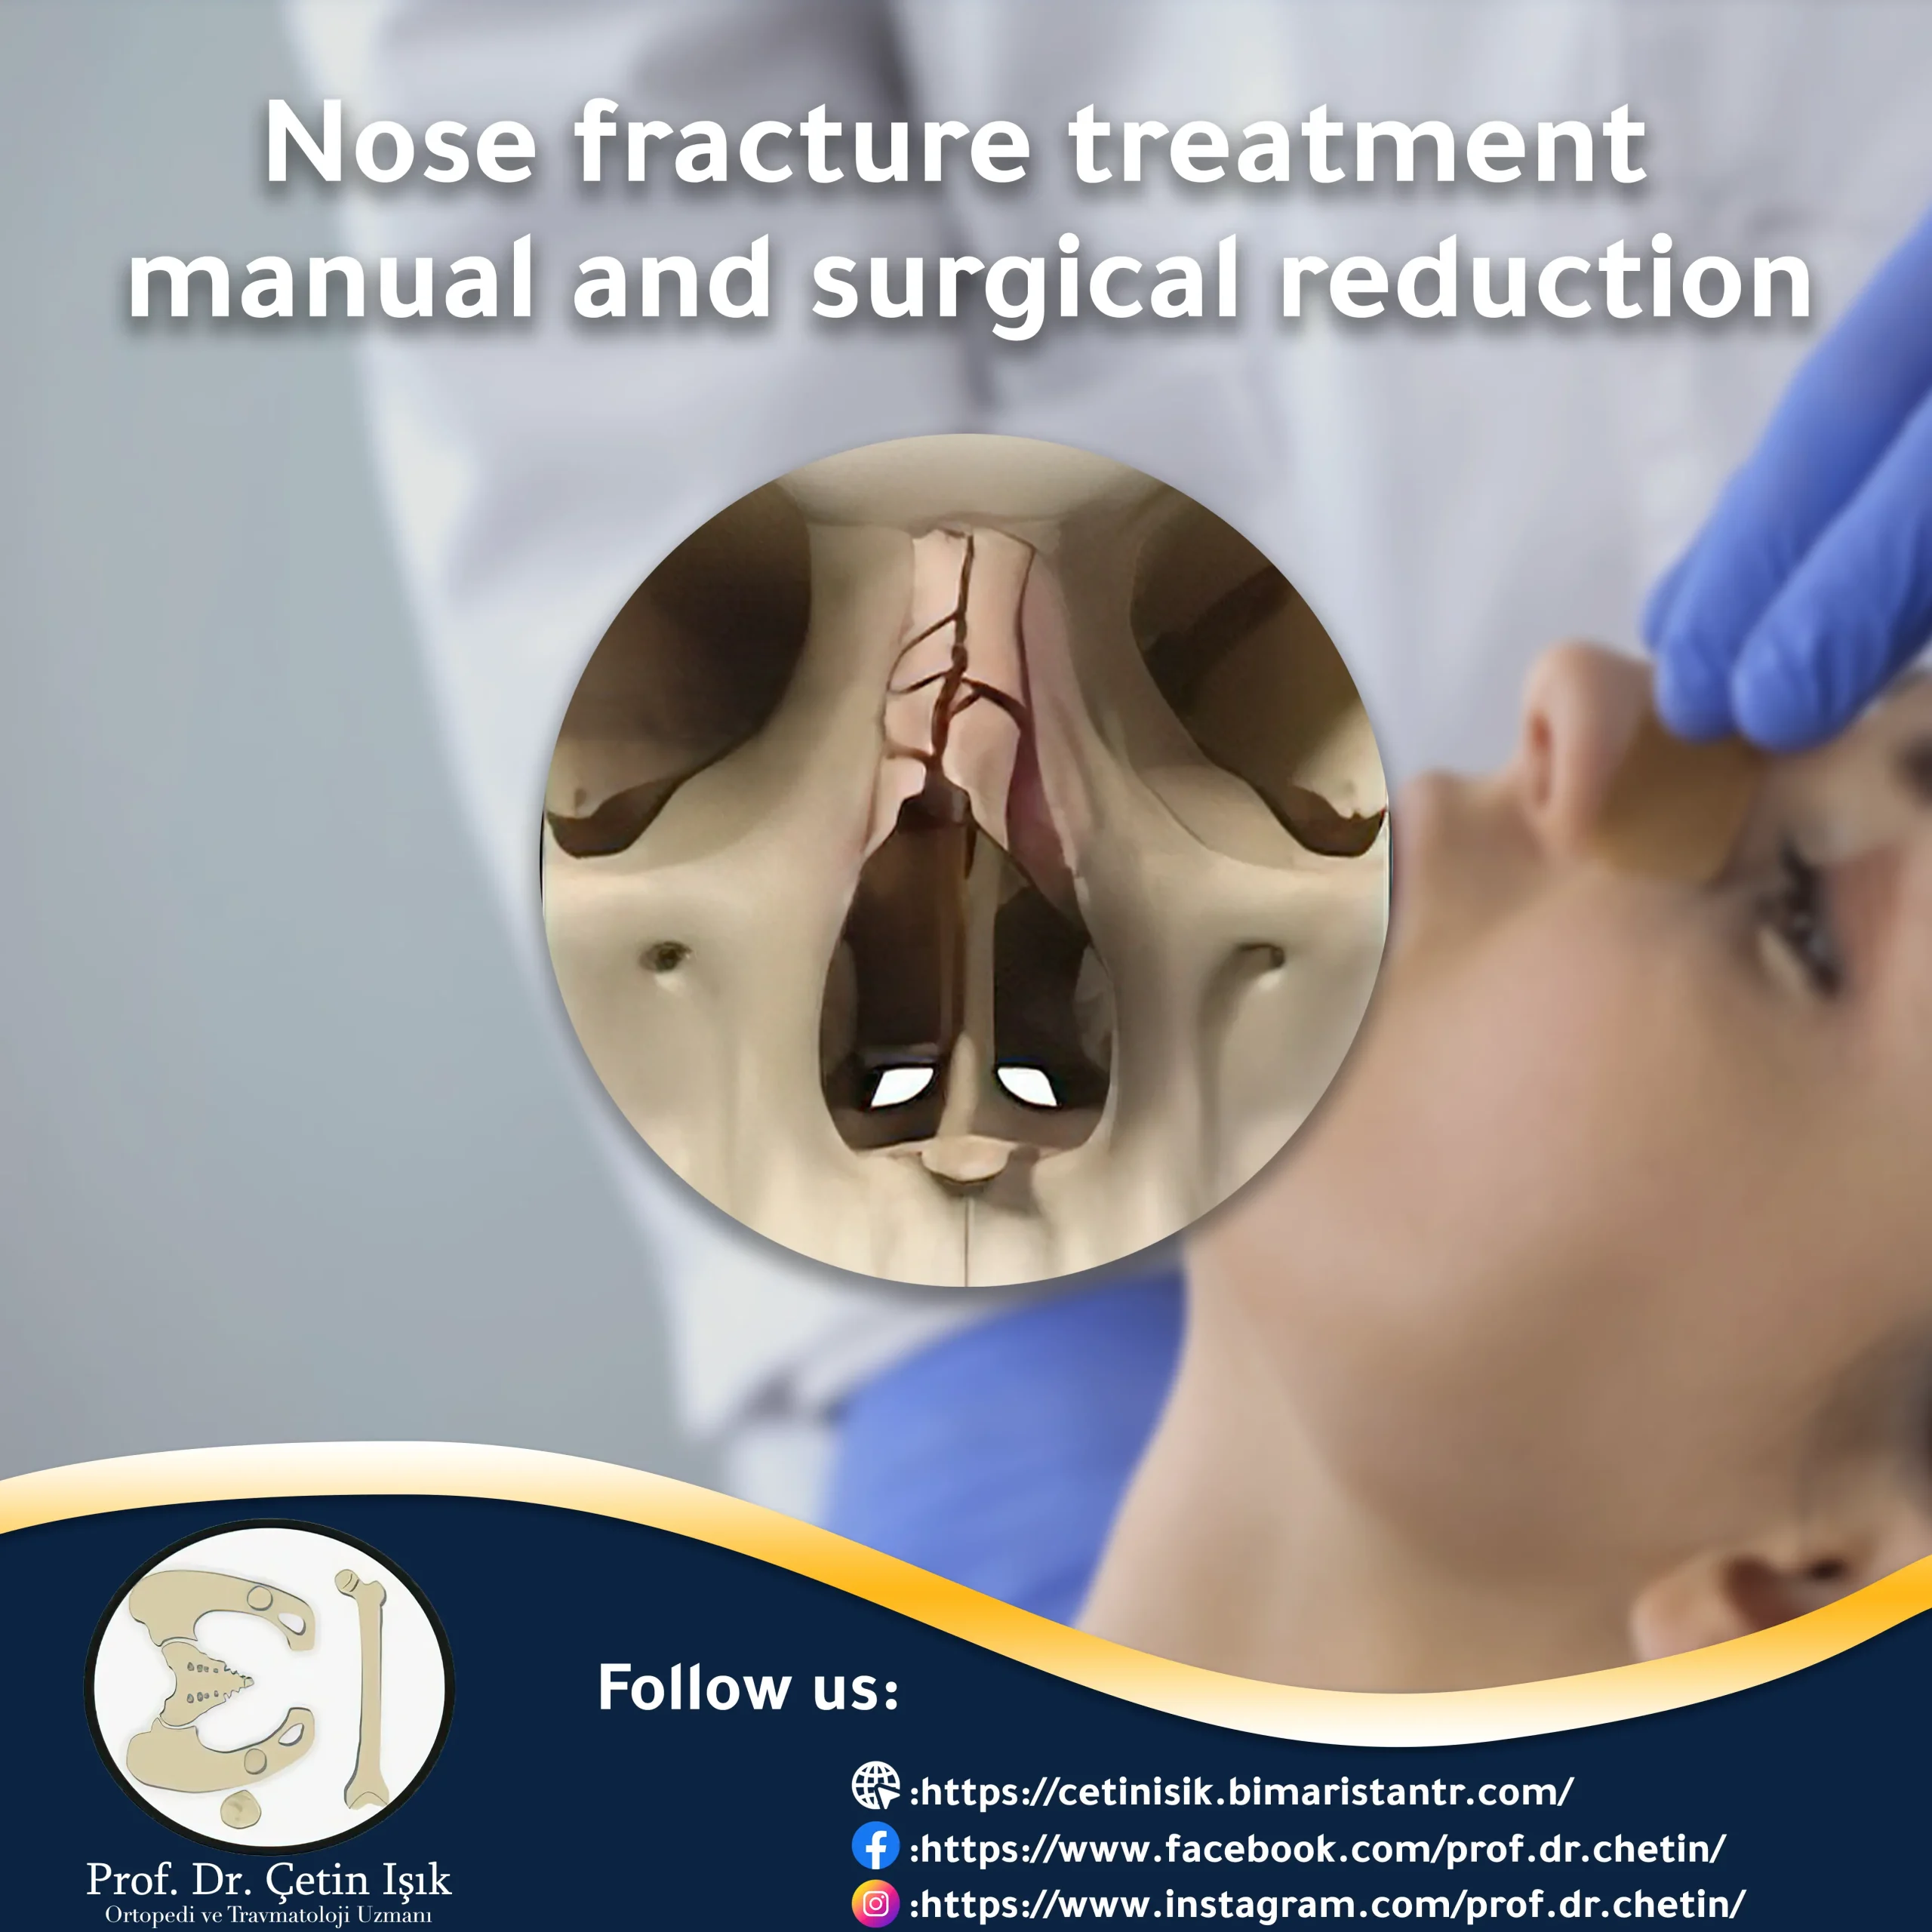 Nose fracture treatment: manual and surgical reduction